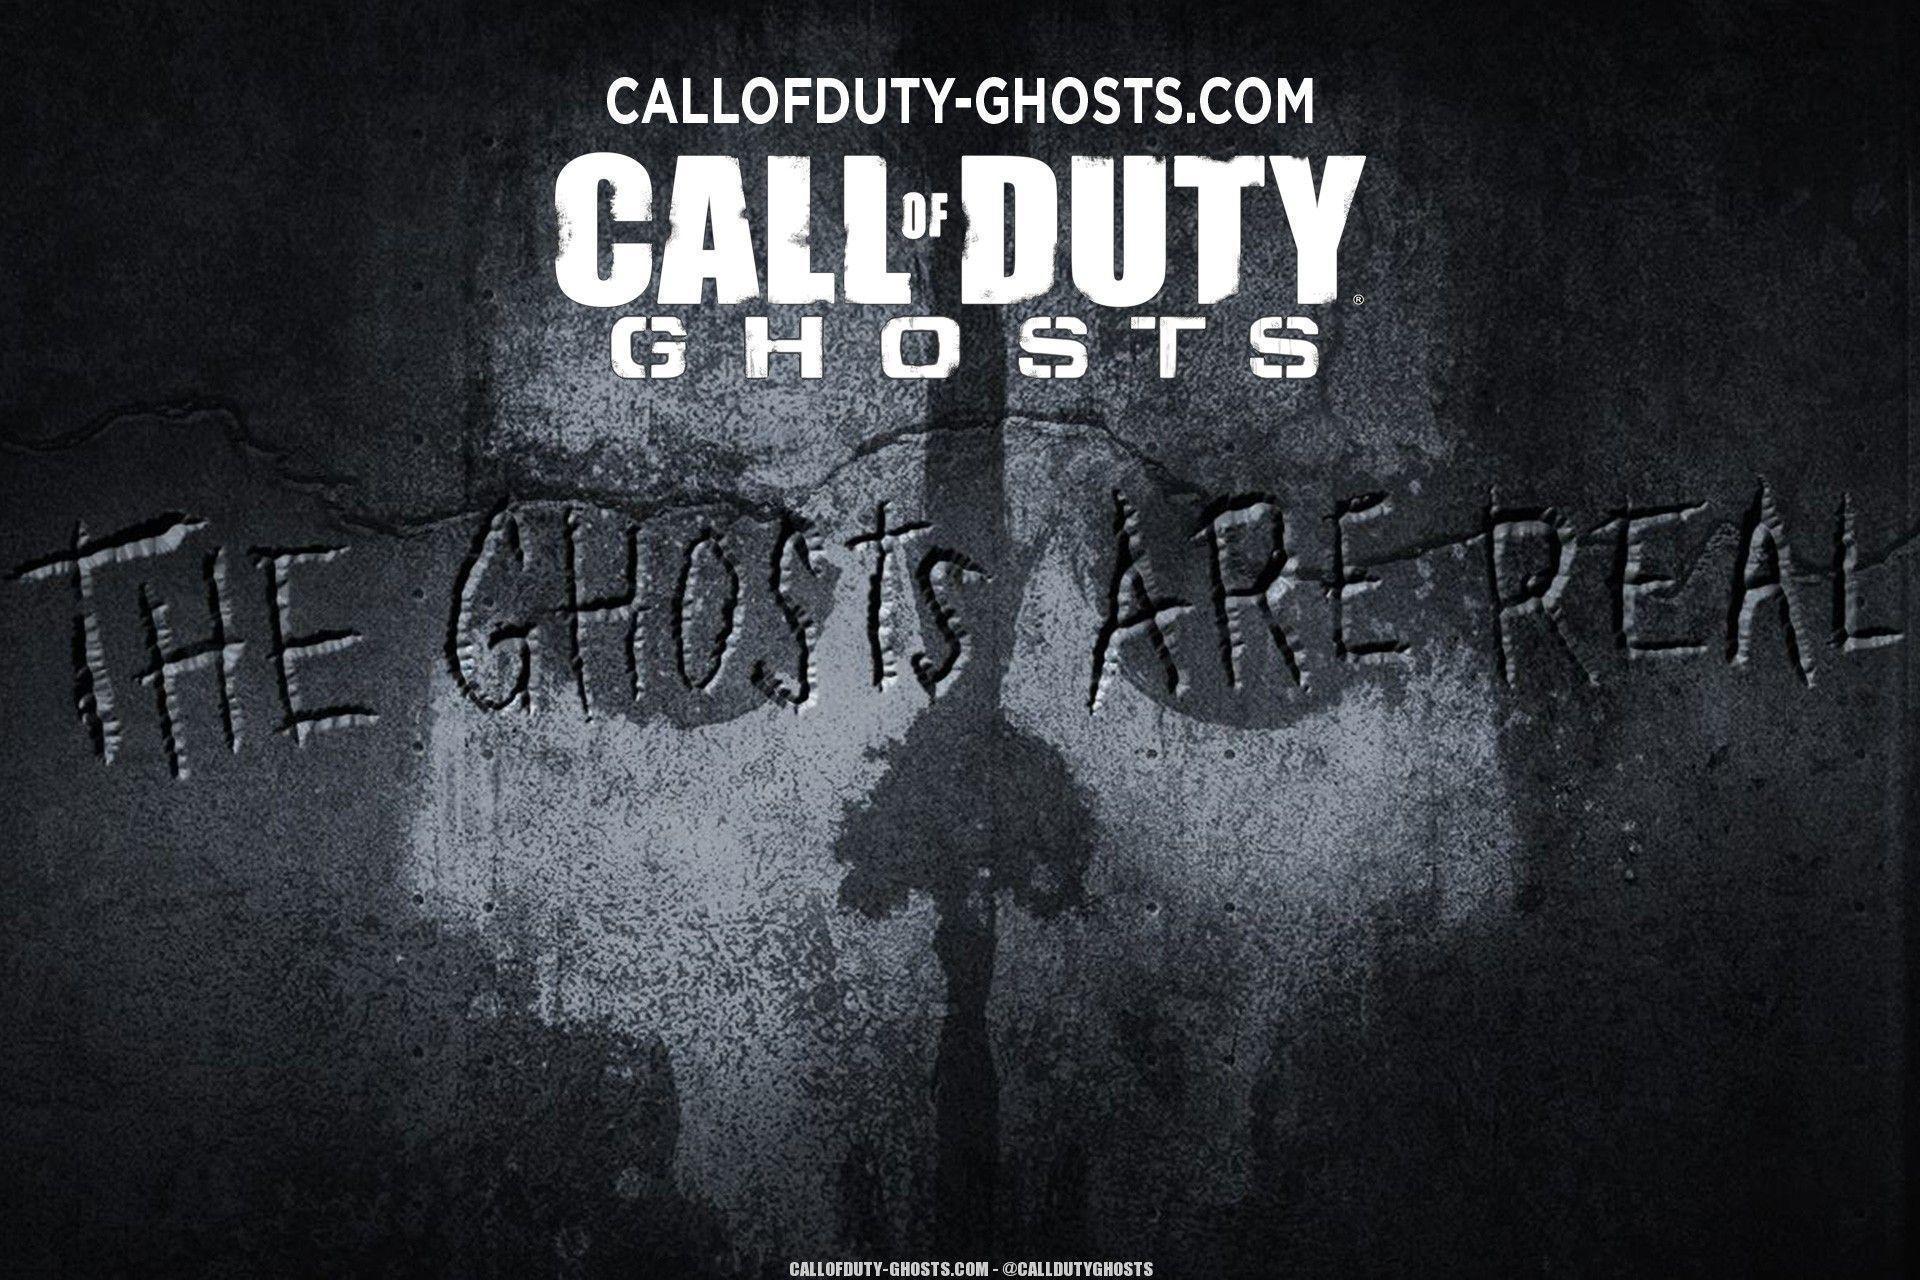 Cod Call Of Duty Ghosts Wallpaper 1920x1280 px Free Download